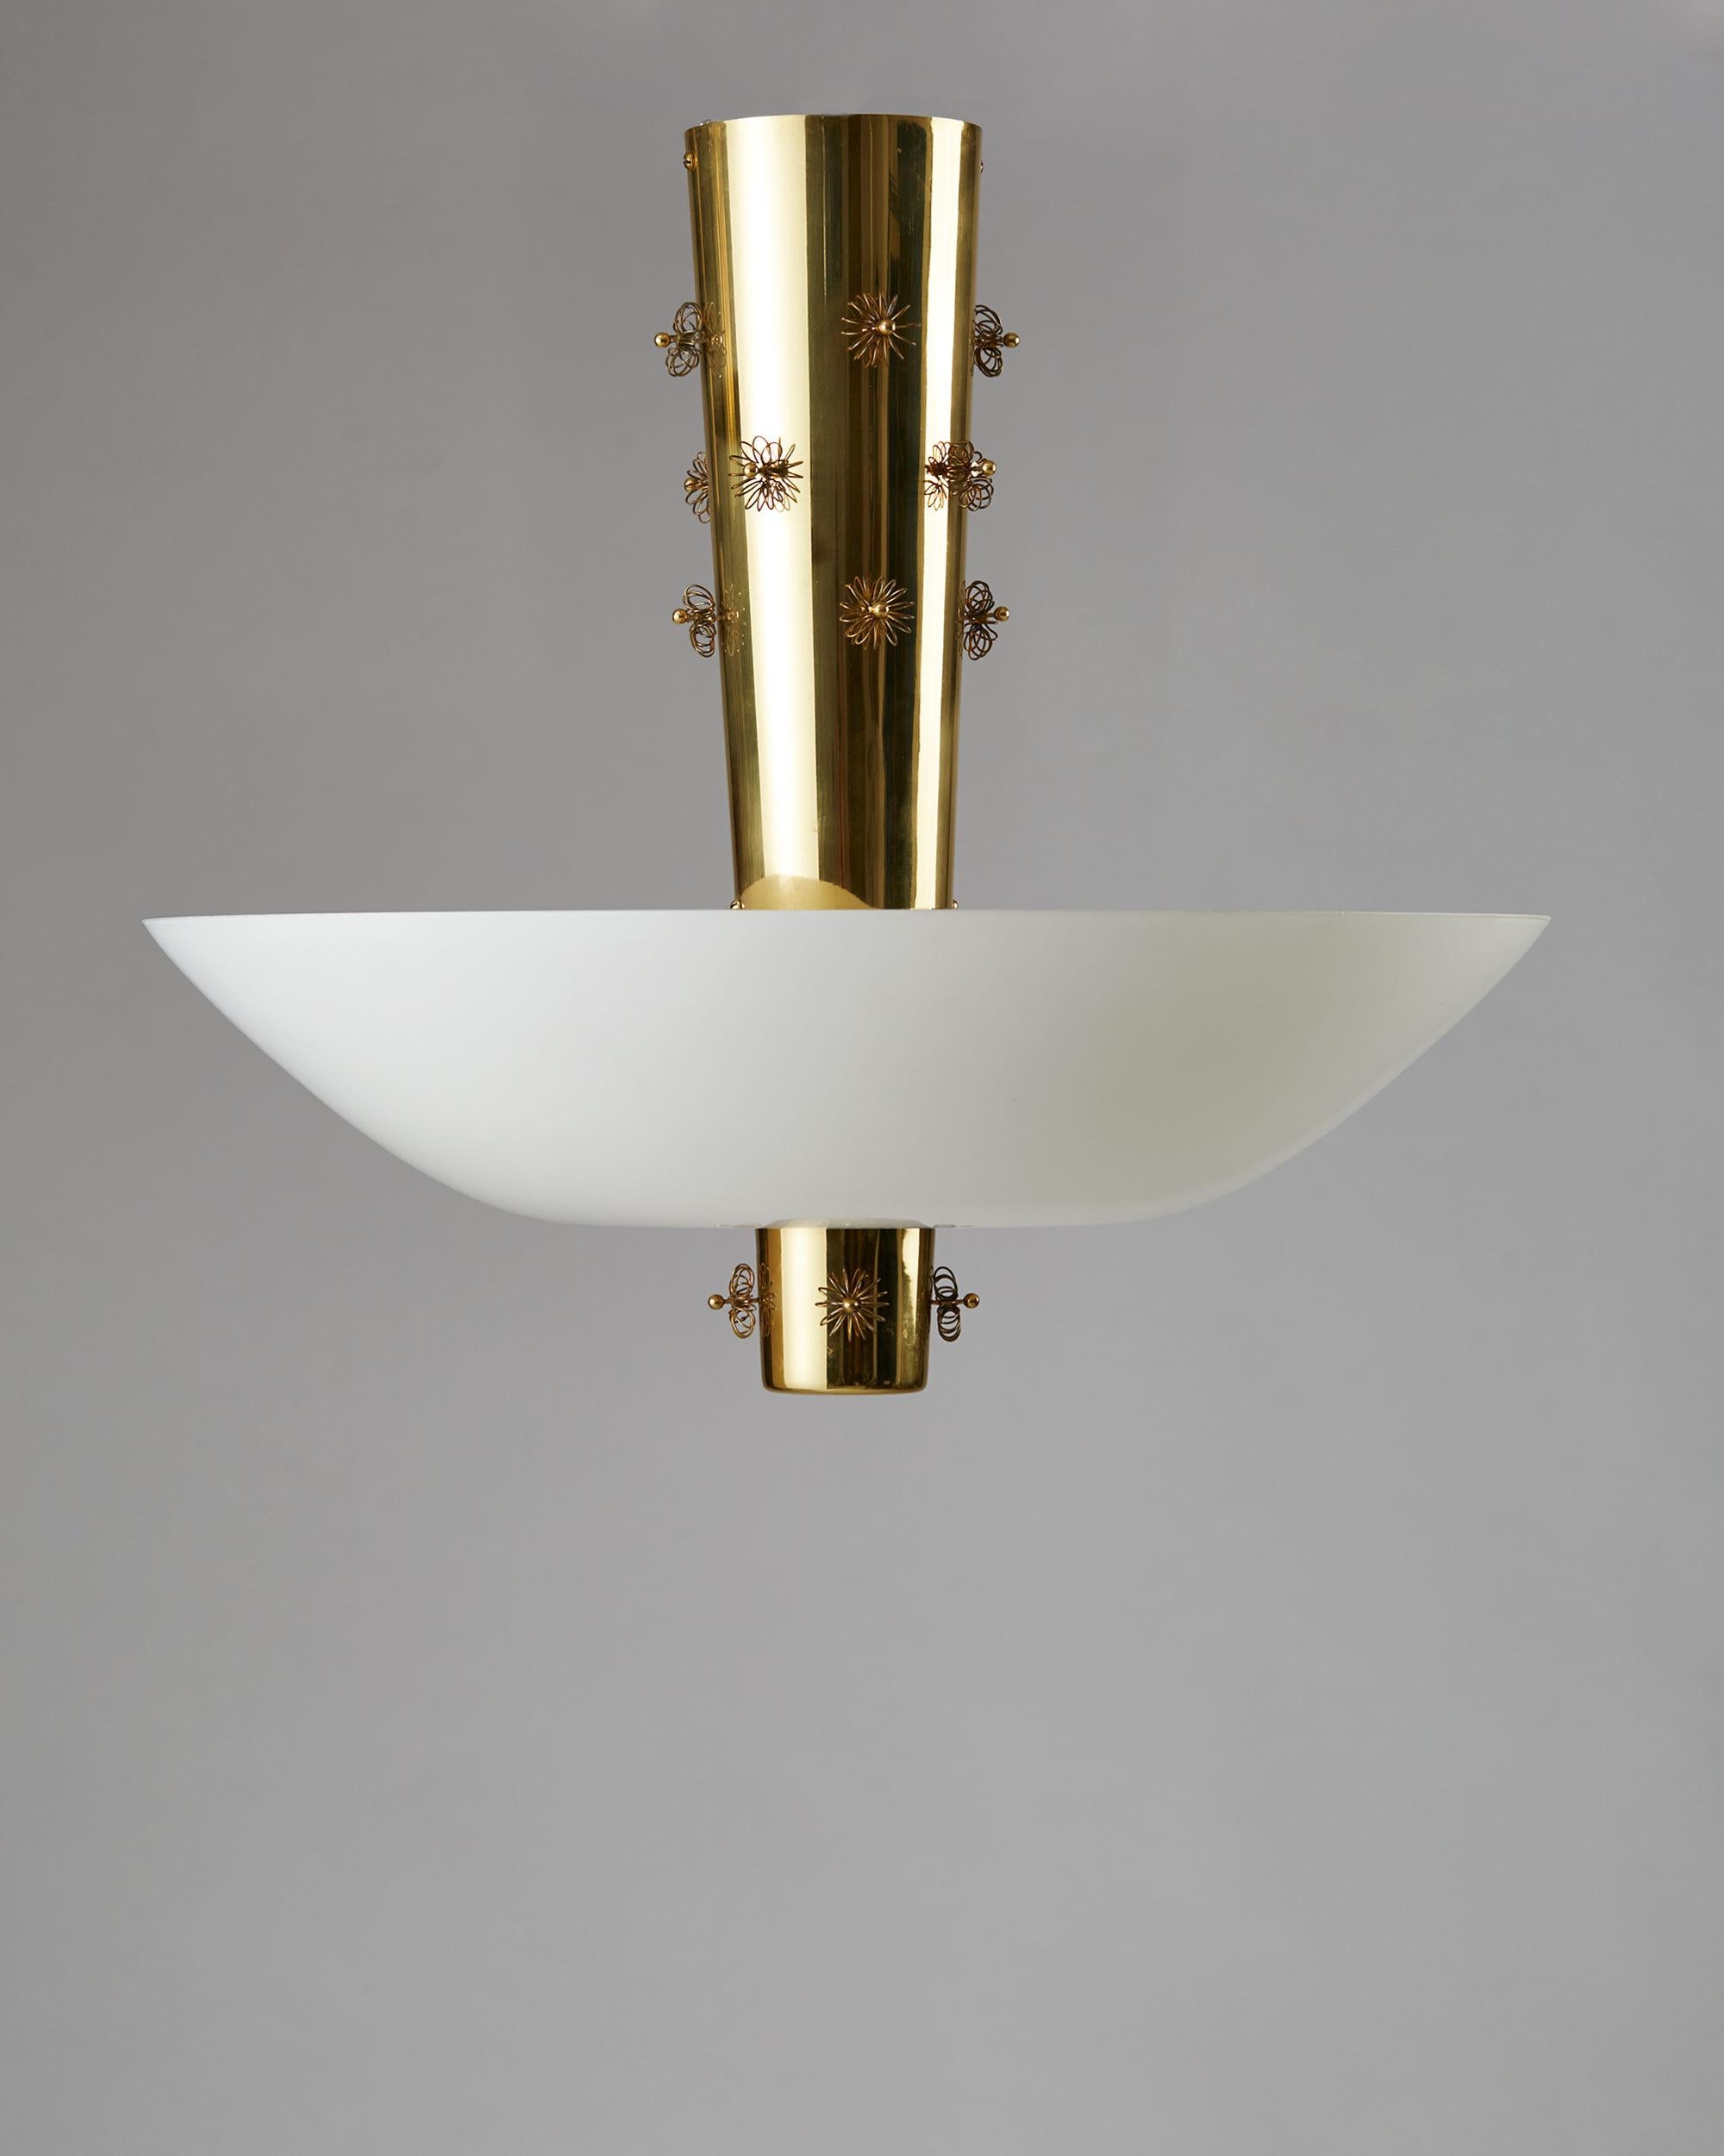 Ceiling lamp designed by Paavo Tynell for Taito Oy, Finland, 1950s.
Brass and opaline glass.

Measures: 
H 57.5 cm/ 1' 11